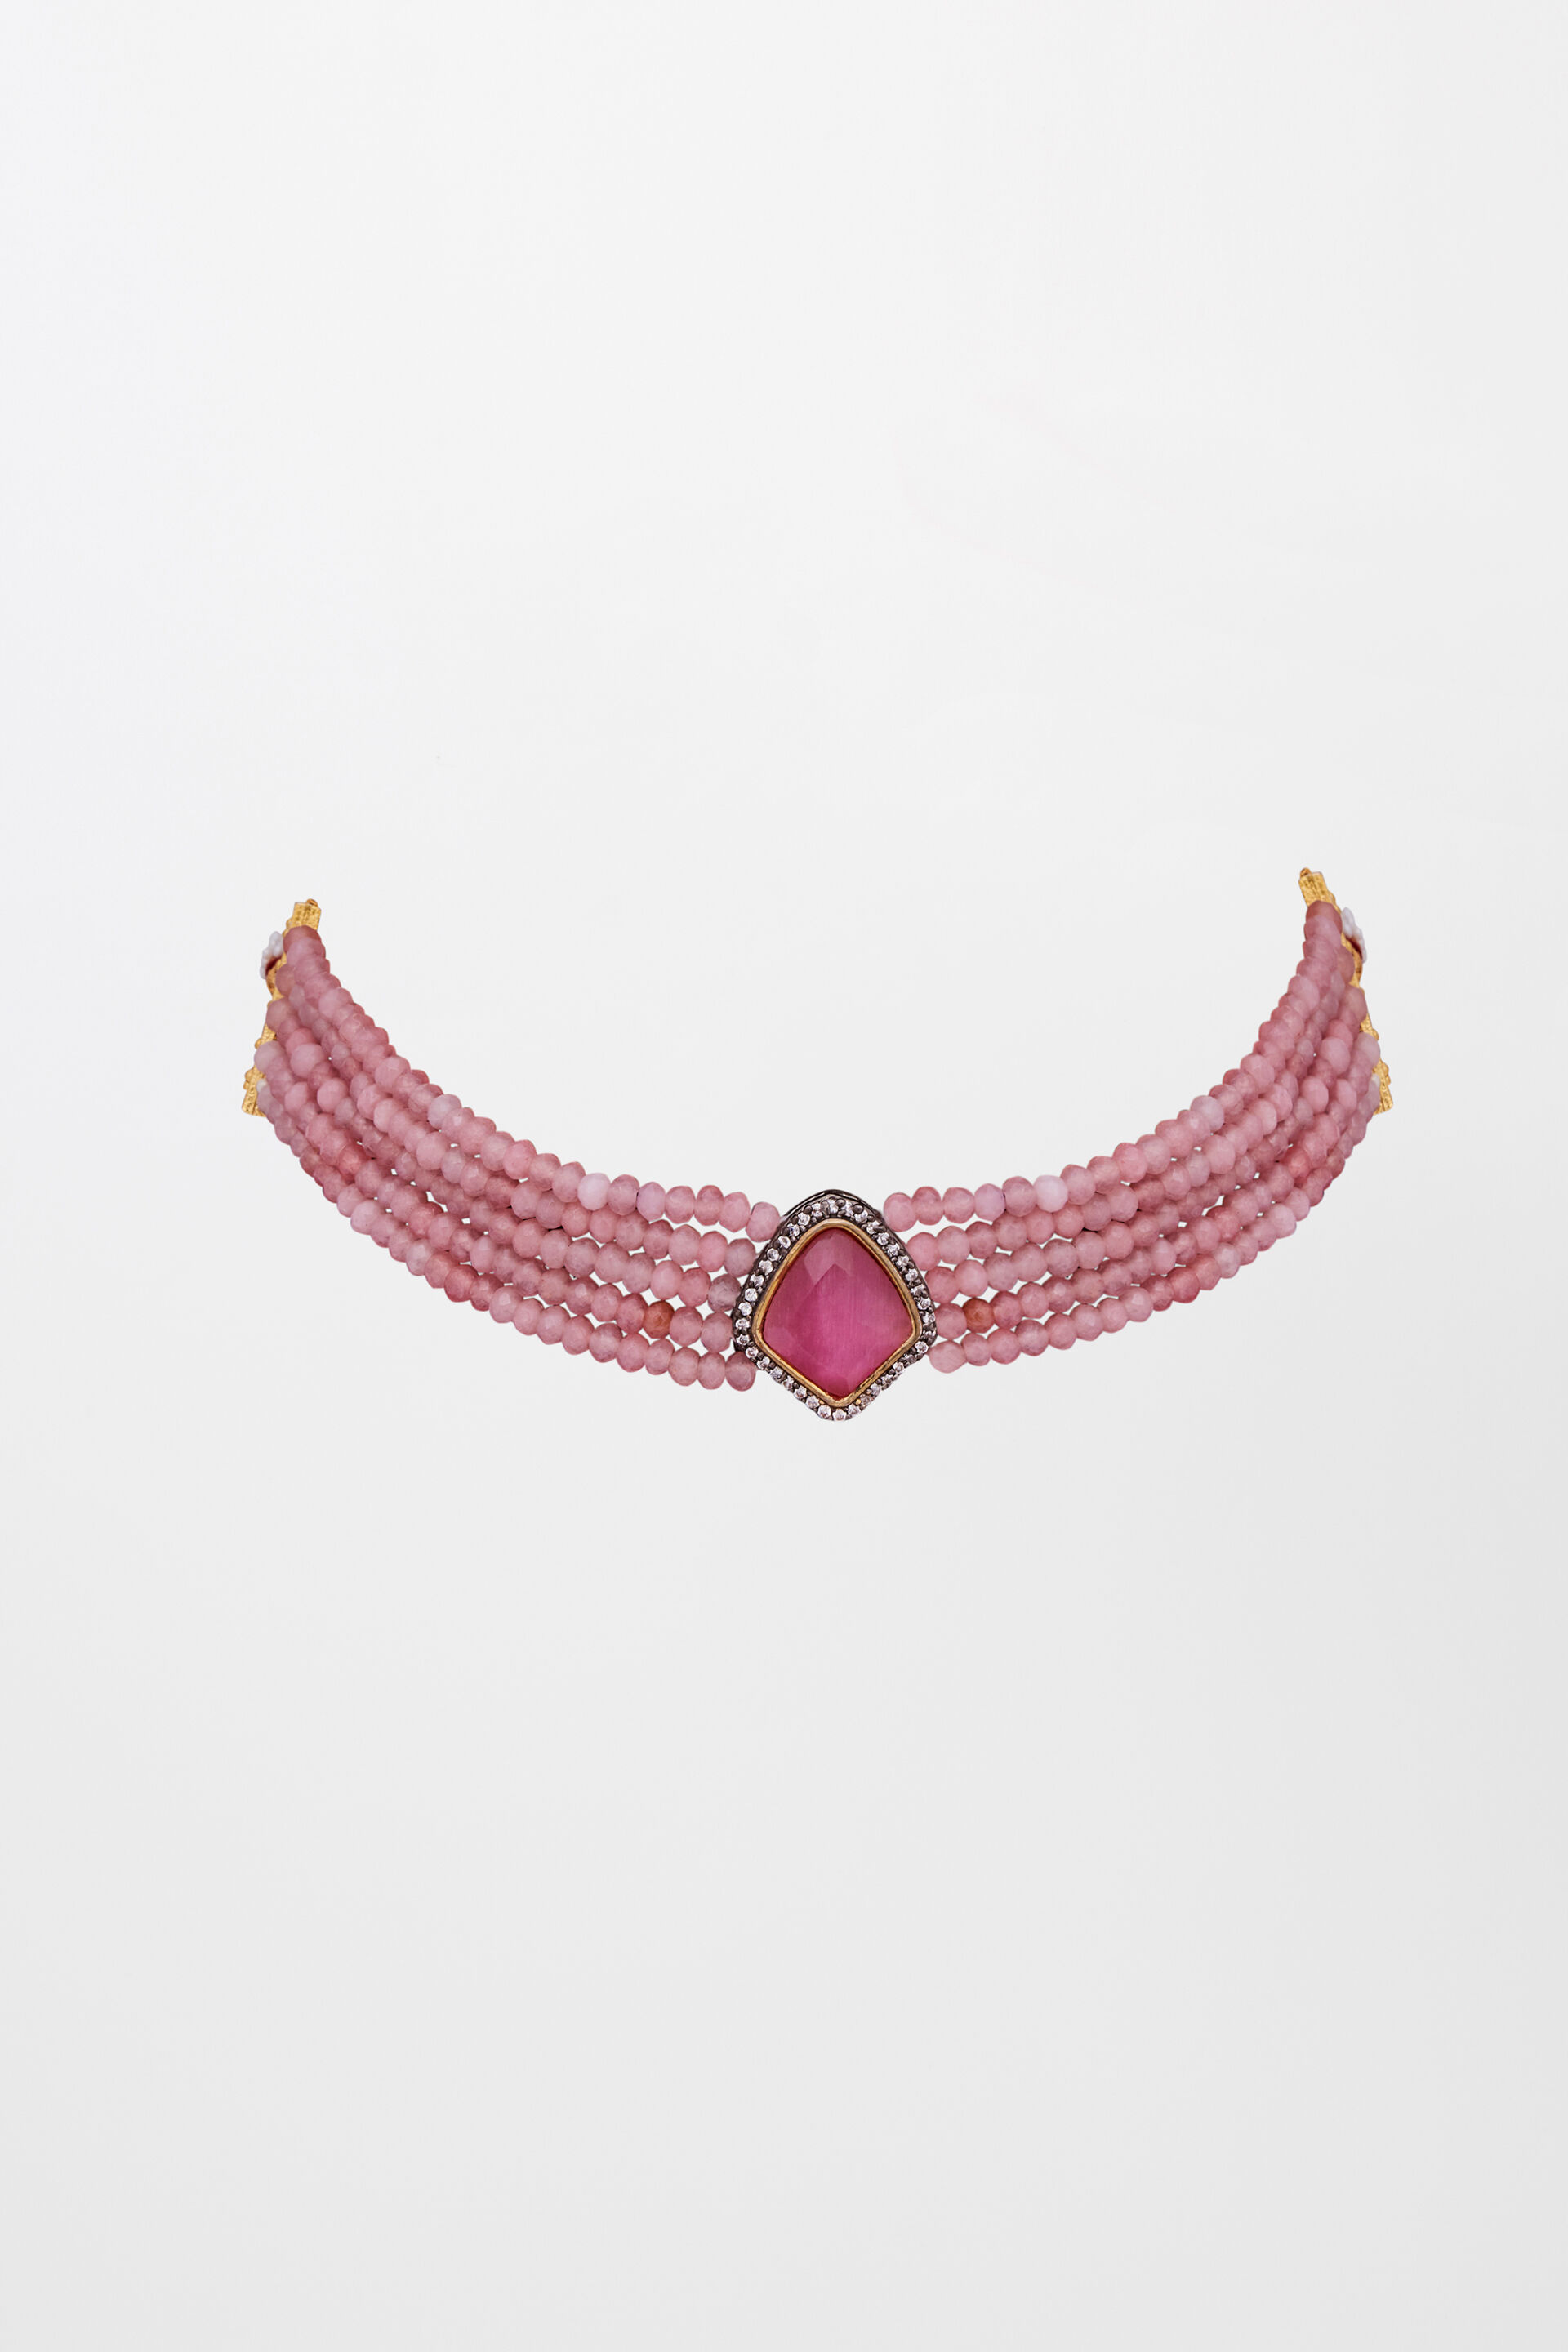 Metallic Hot Pink Bead Necklaces for Sale | Amols'